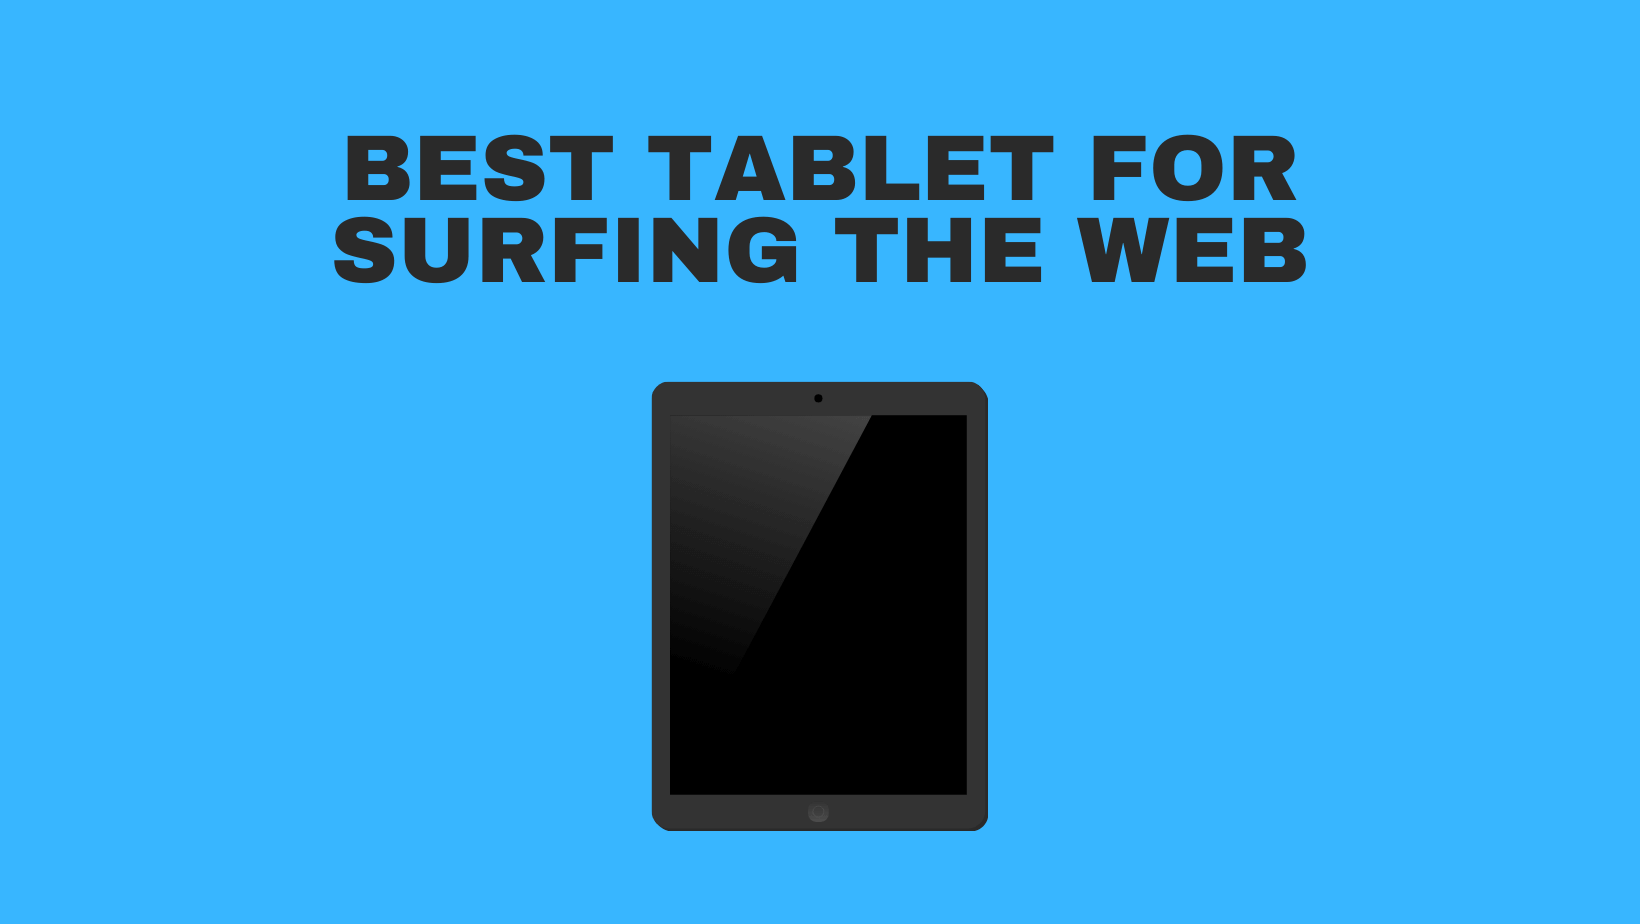 Best Tablet For Surfing The Web